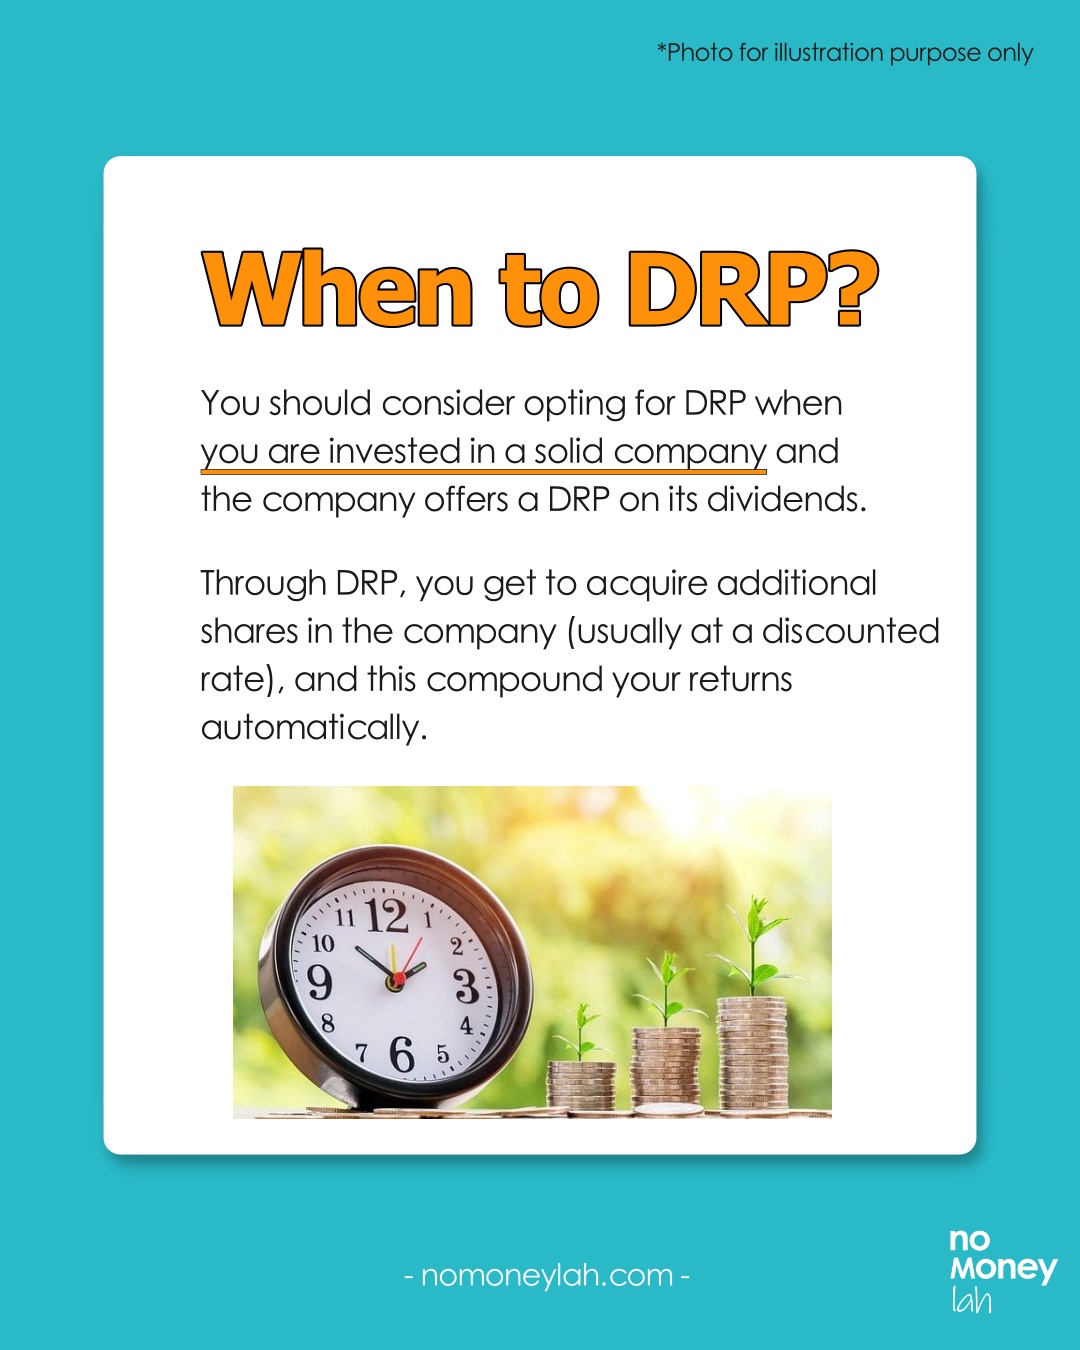 When to opt for DRP?